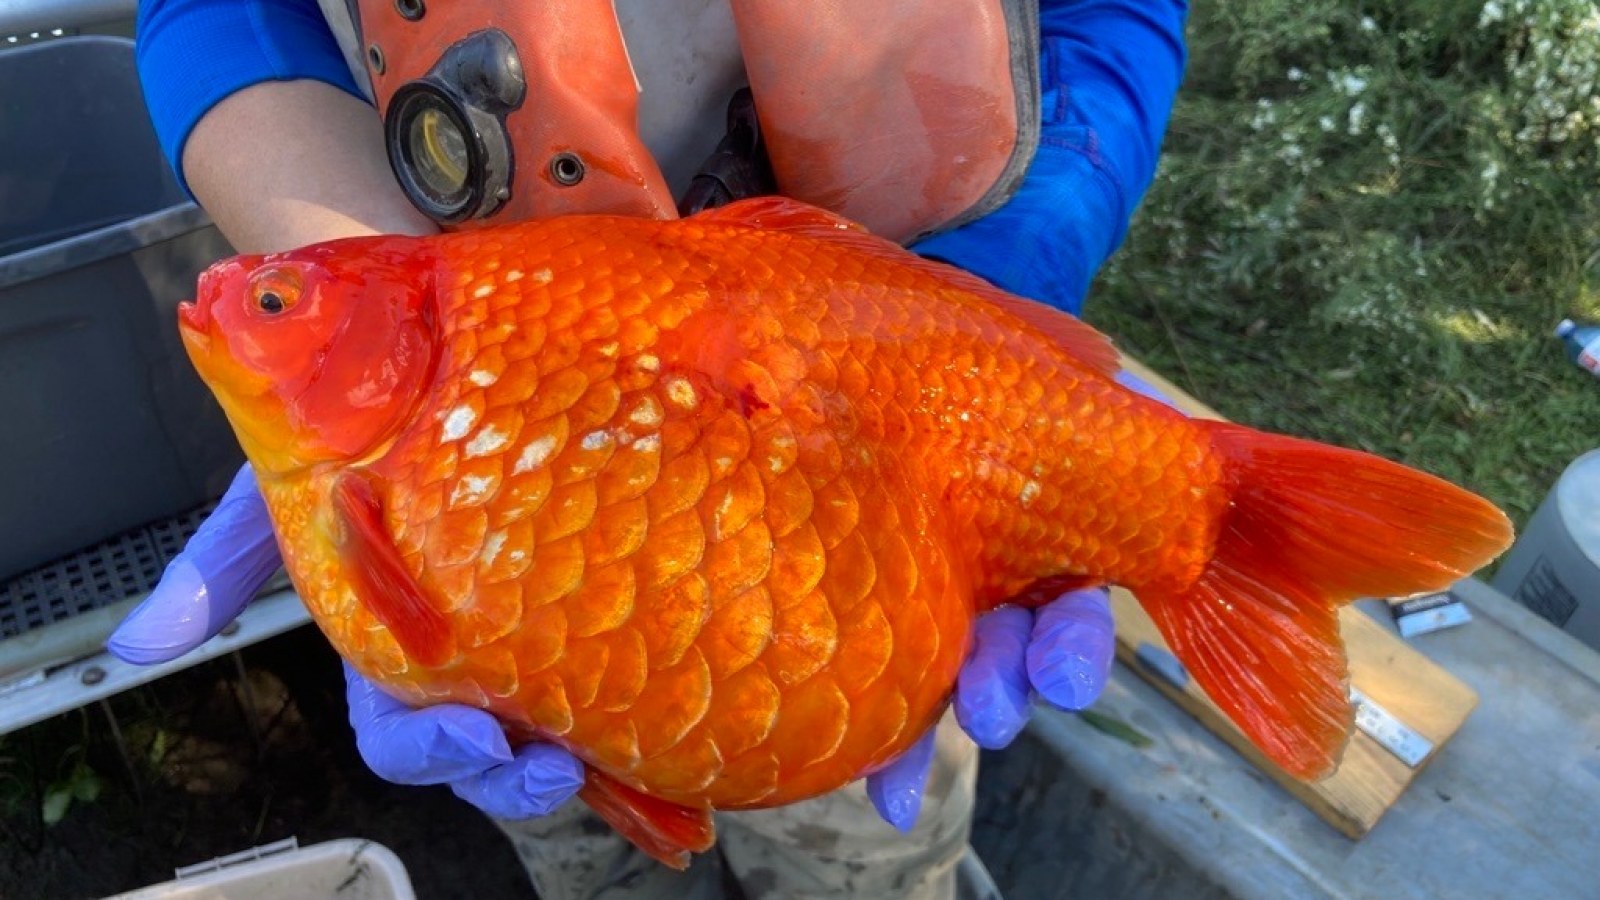 https://naked-science.ru/wp-content/uploads/2022/04/goldfish-it-yright-Fisheries-and-Oceans-Canada-.jpg